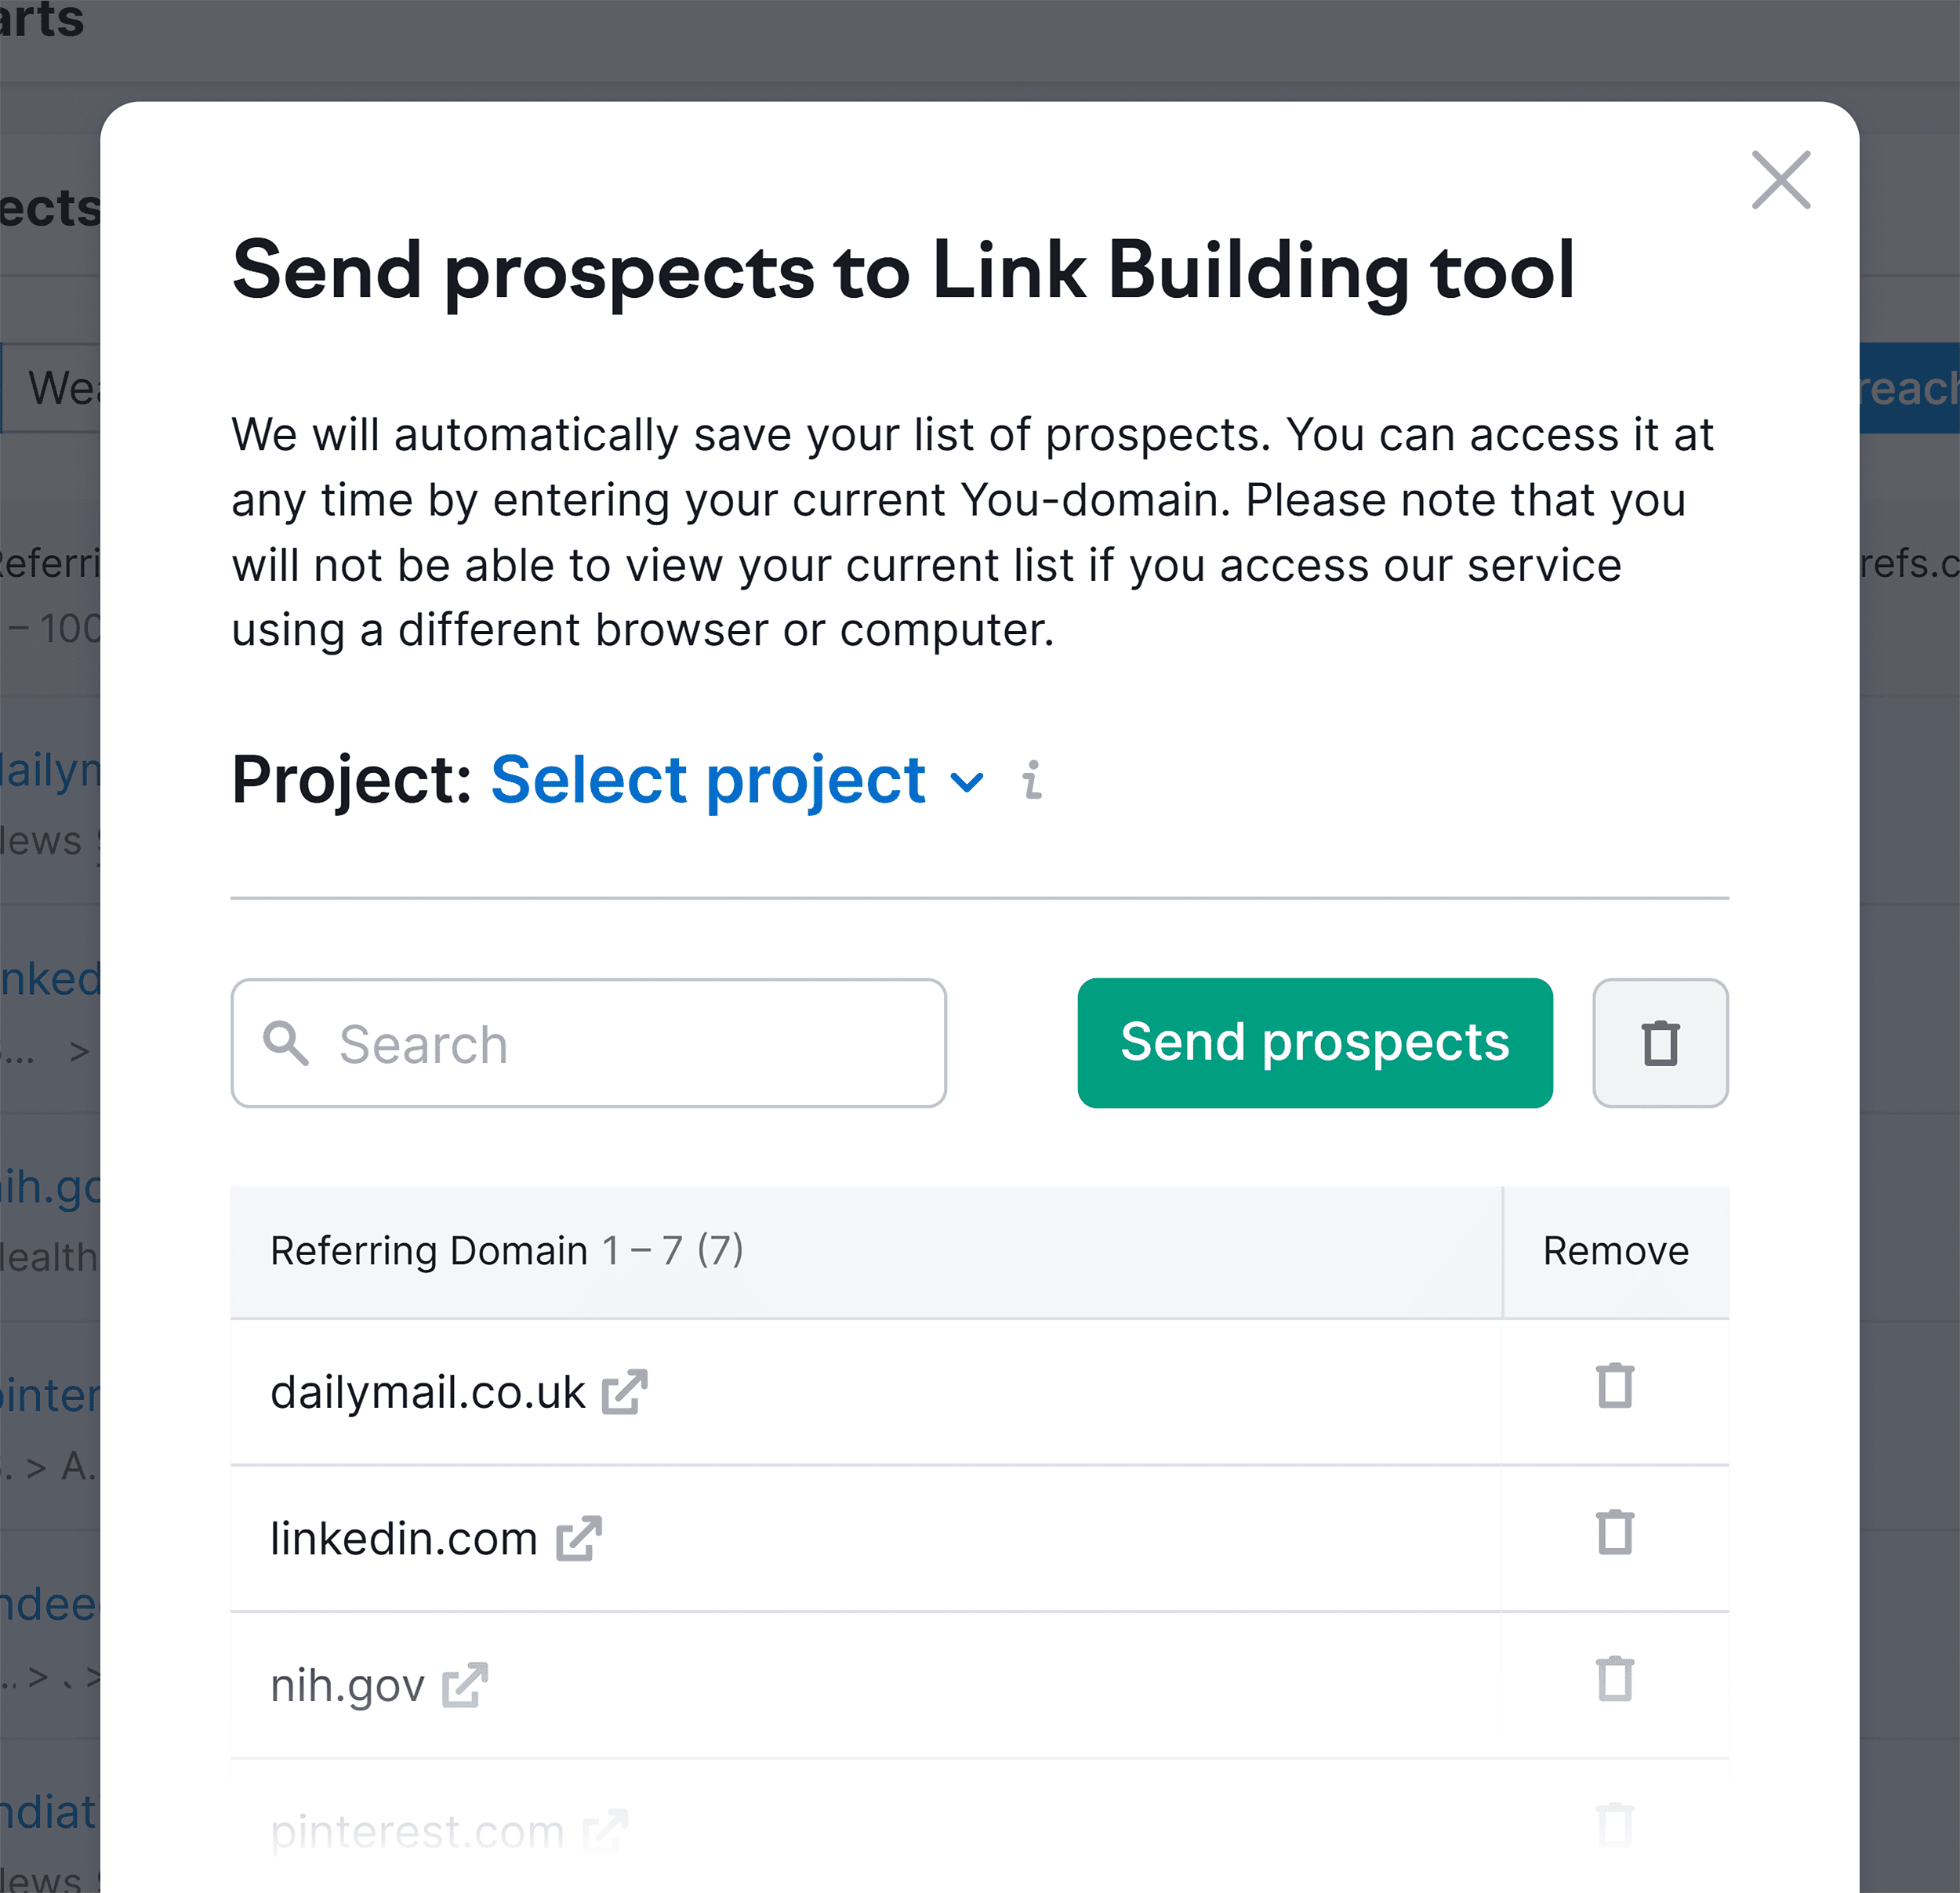 Send prospects to Link Building Tool